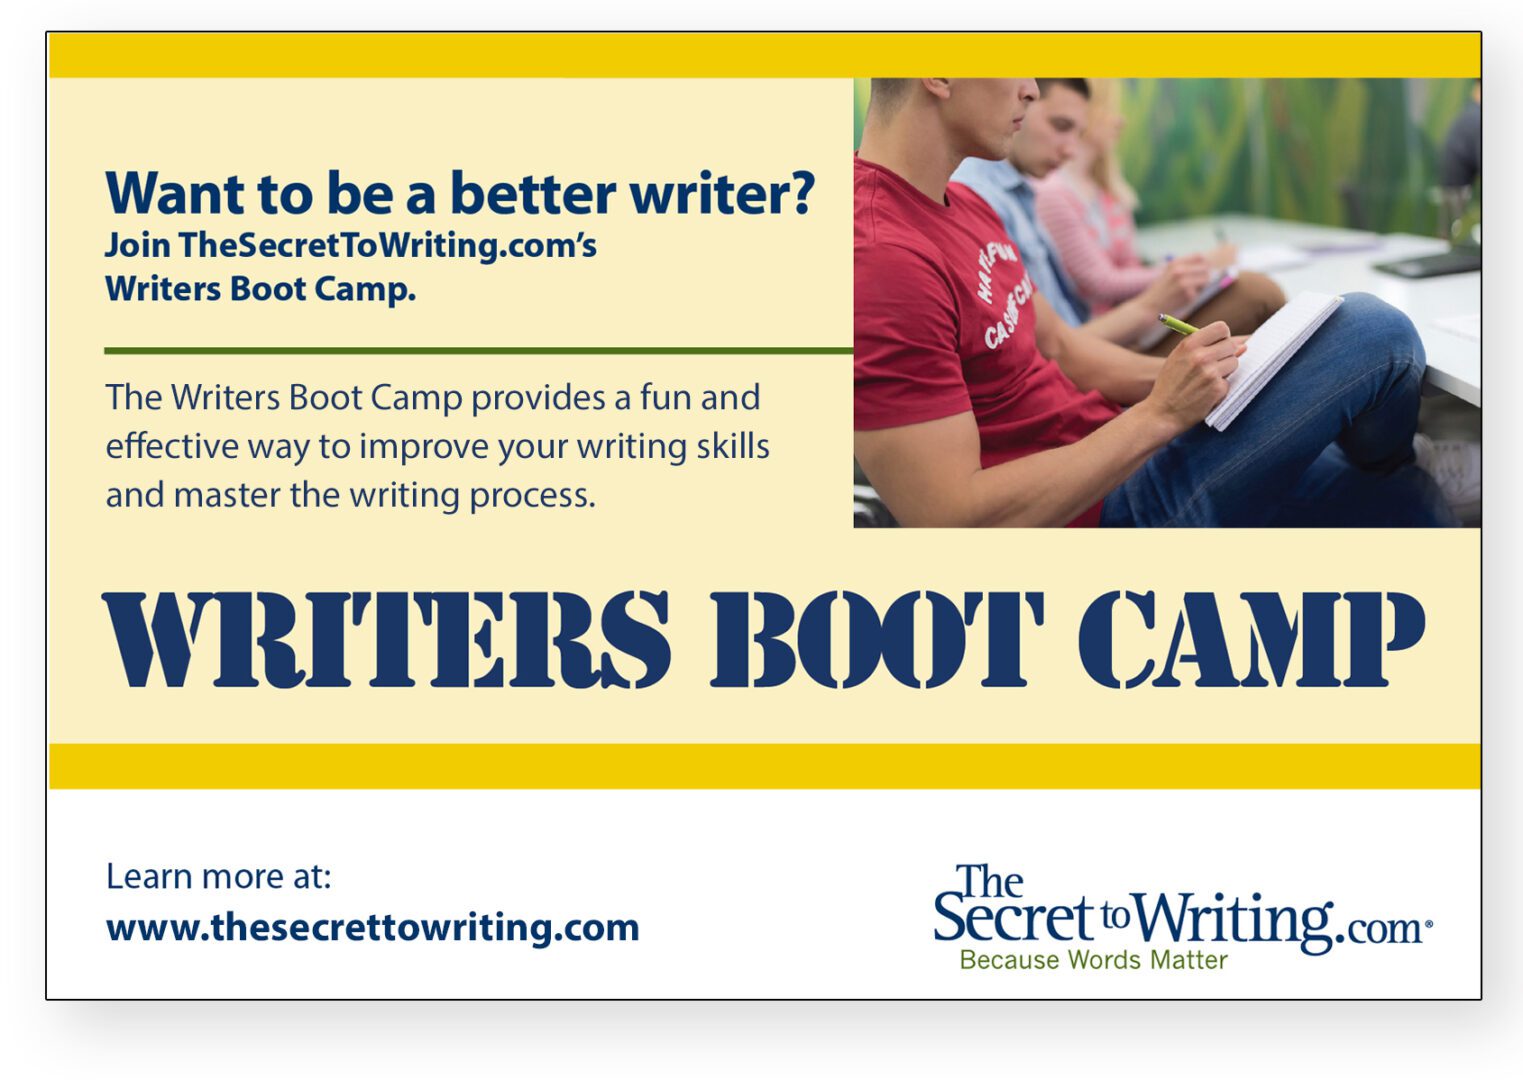 A poster advertising the writers boot camp.